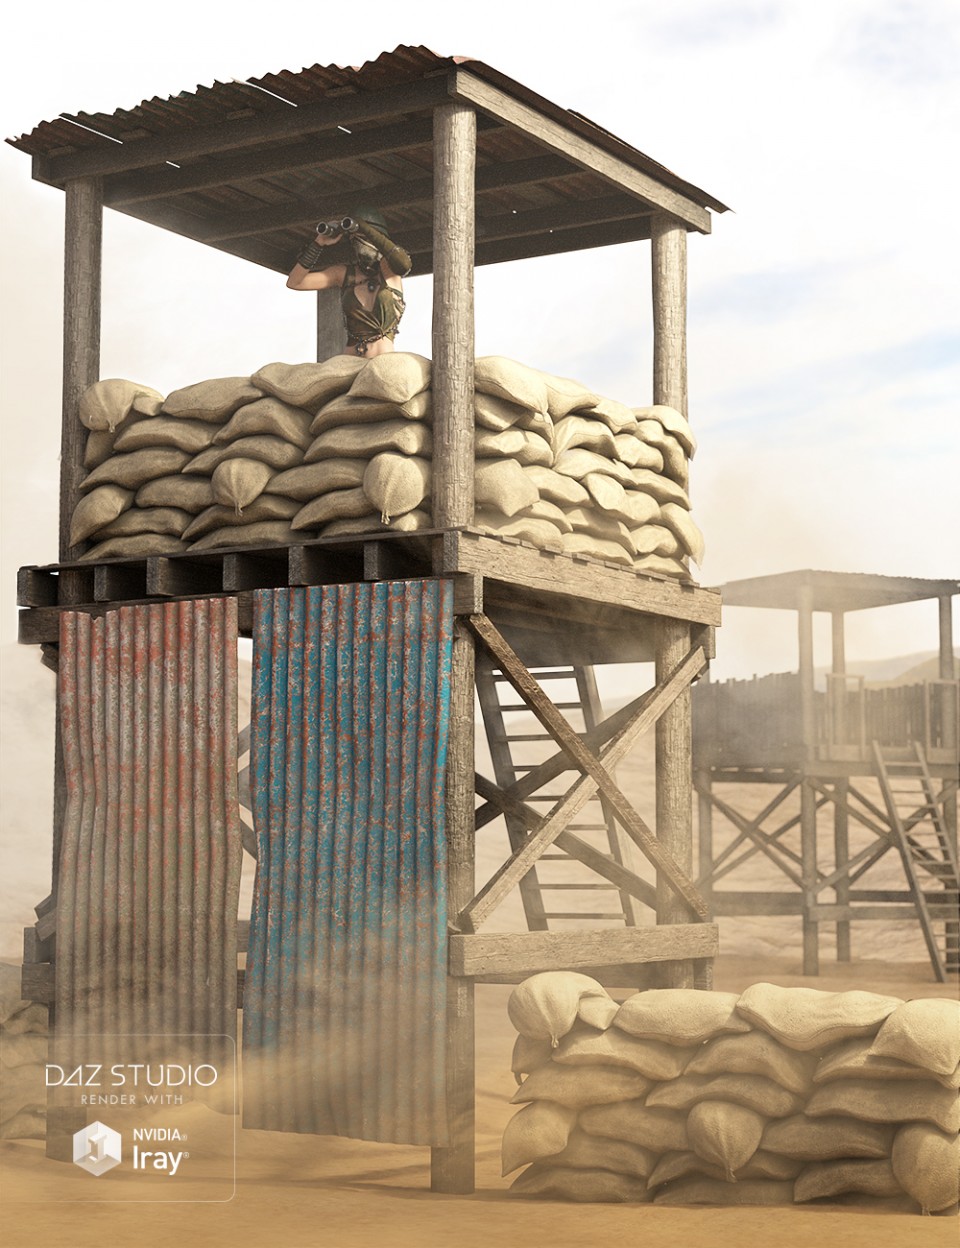 Post-apocalyptic Guard Tower